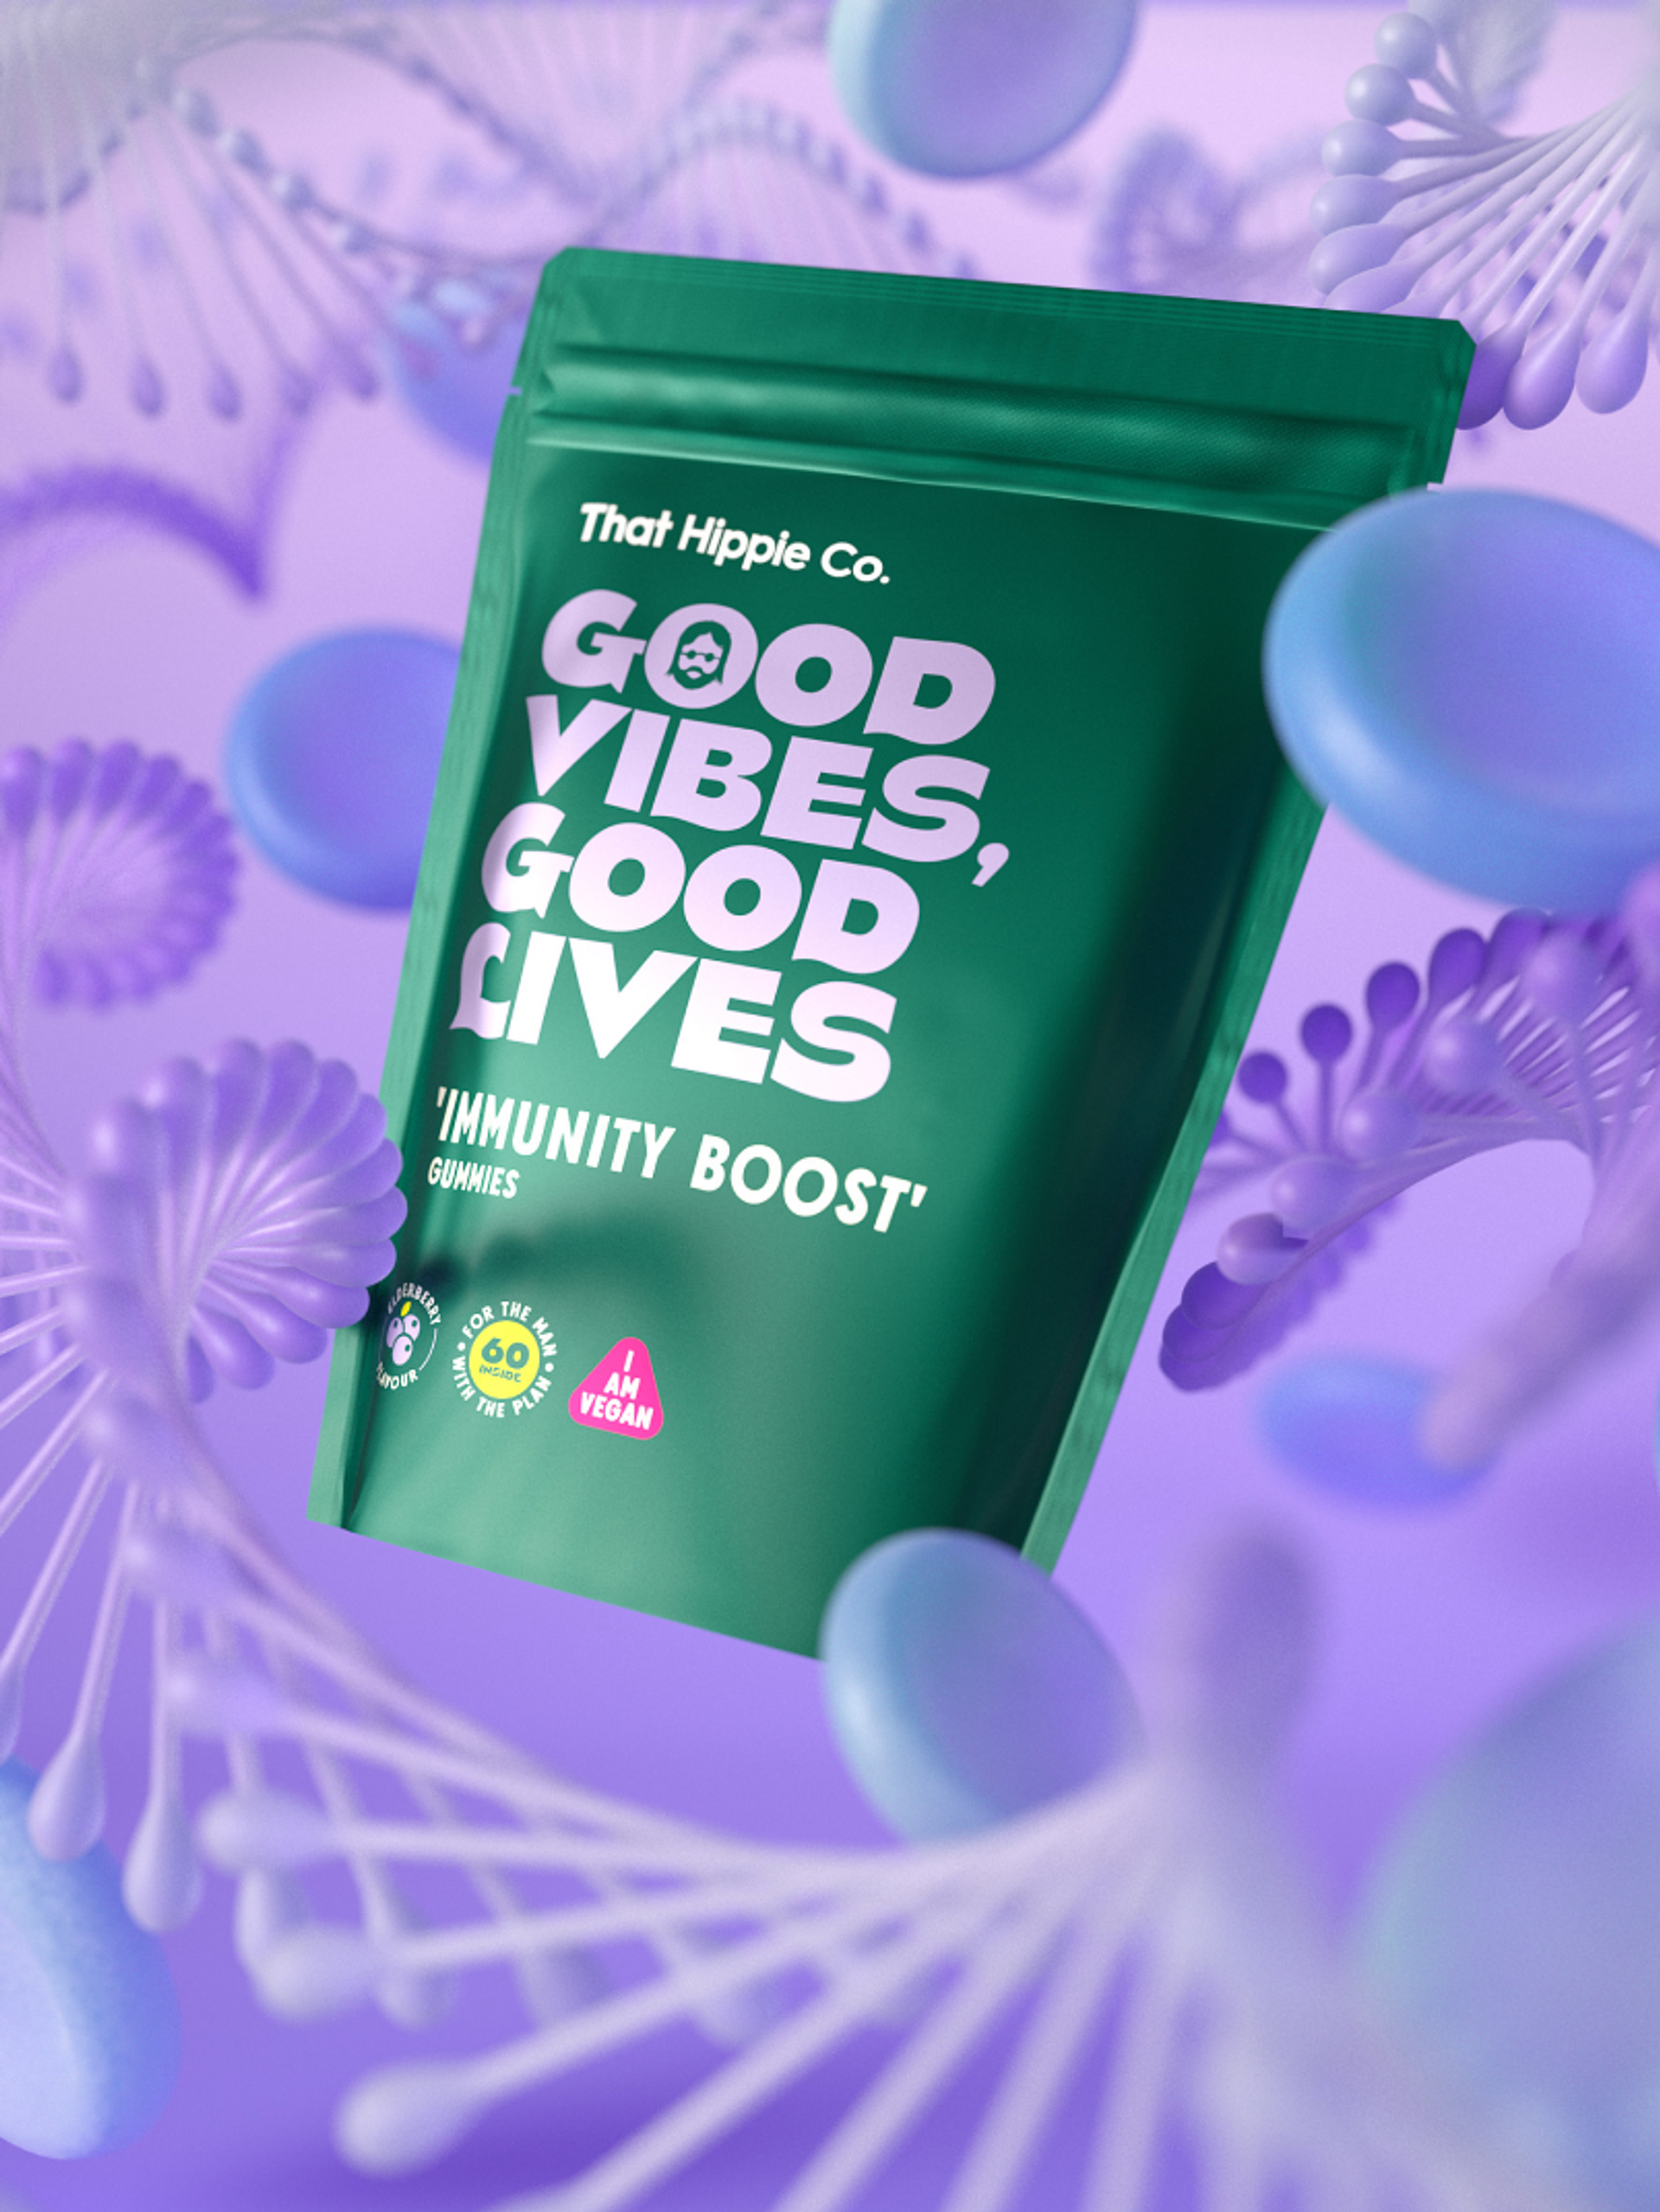 Immunity boost gummy supplements from That Hippie Co pouch design by Our Revolution design agency in sydney, surrounded by 3D model helix on purple gradient background